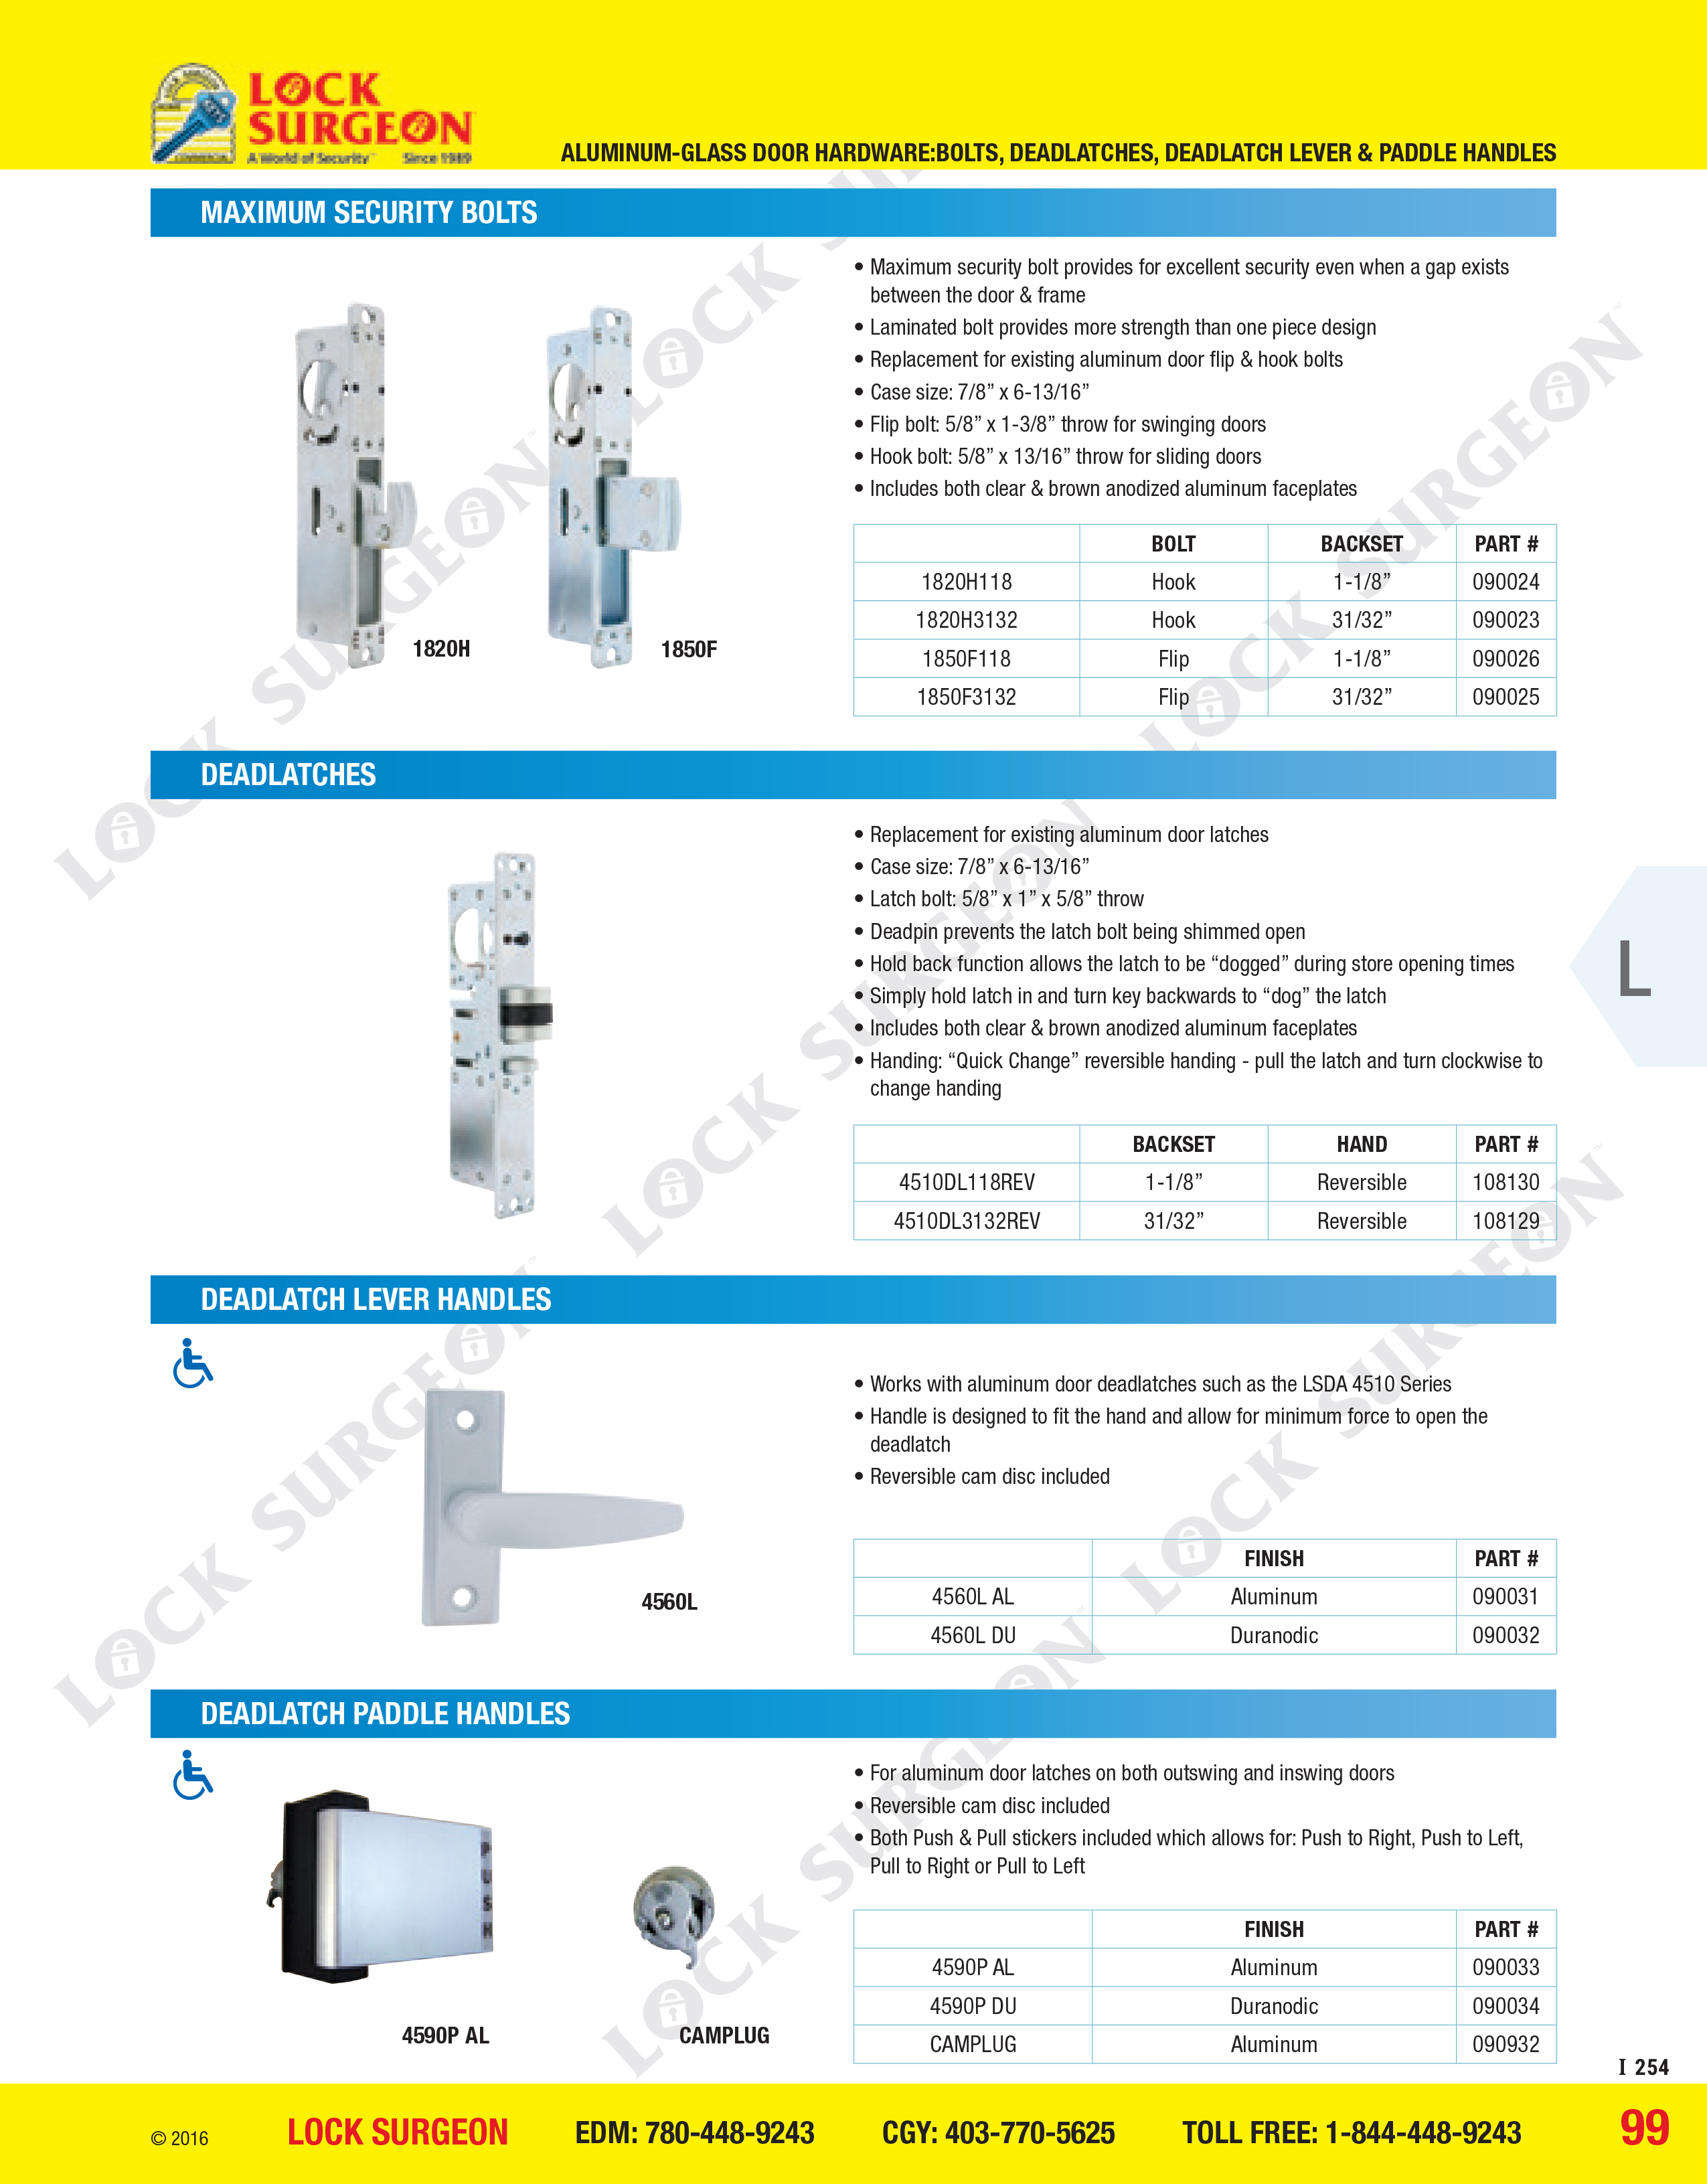 Maximum security bolts, deadlatches, deadlatch lever handles and deadlatch paddle handles.